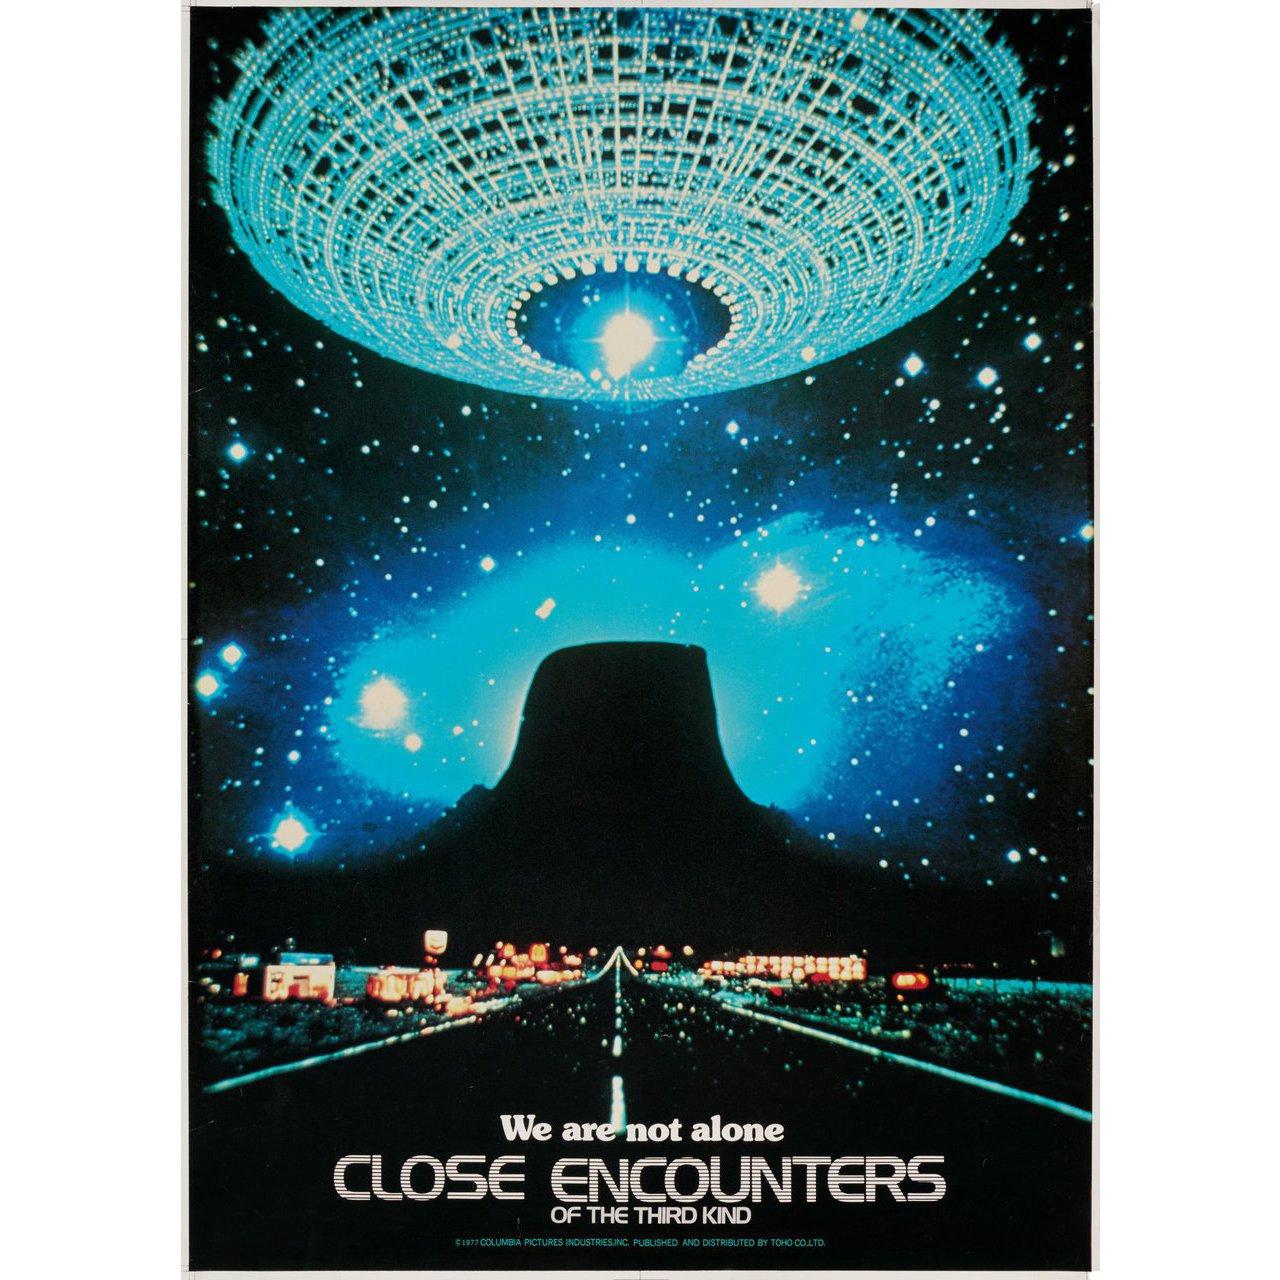 Original 1977 Japanese B2 poster for the film Close Encounters of the Third Kind directed by Steven Spielberg with Richard Dreyfuss / Francois Truffaut / Teri Garr / Melinda Dillon. Very Good-Fine condition, rolled. Please note: the size is stated